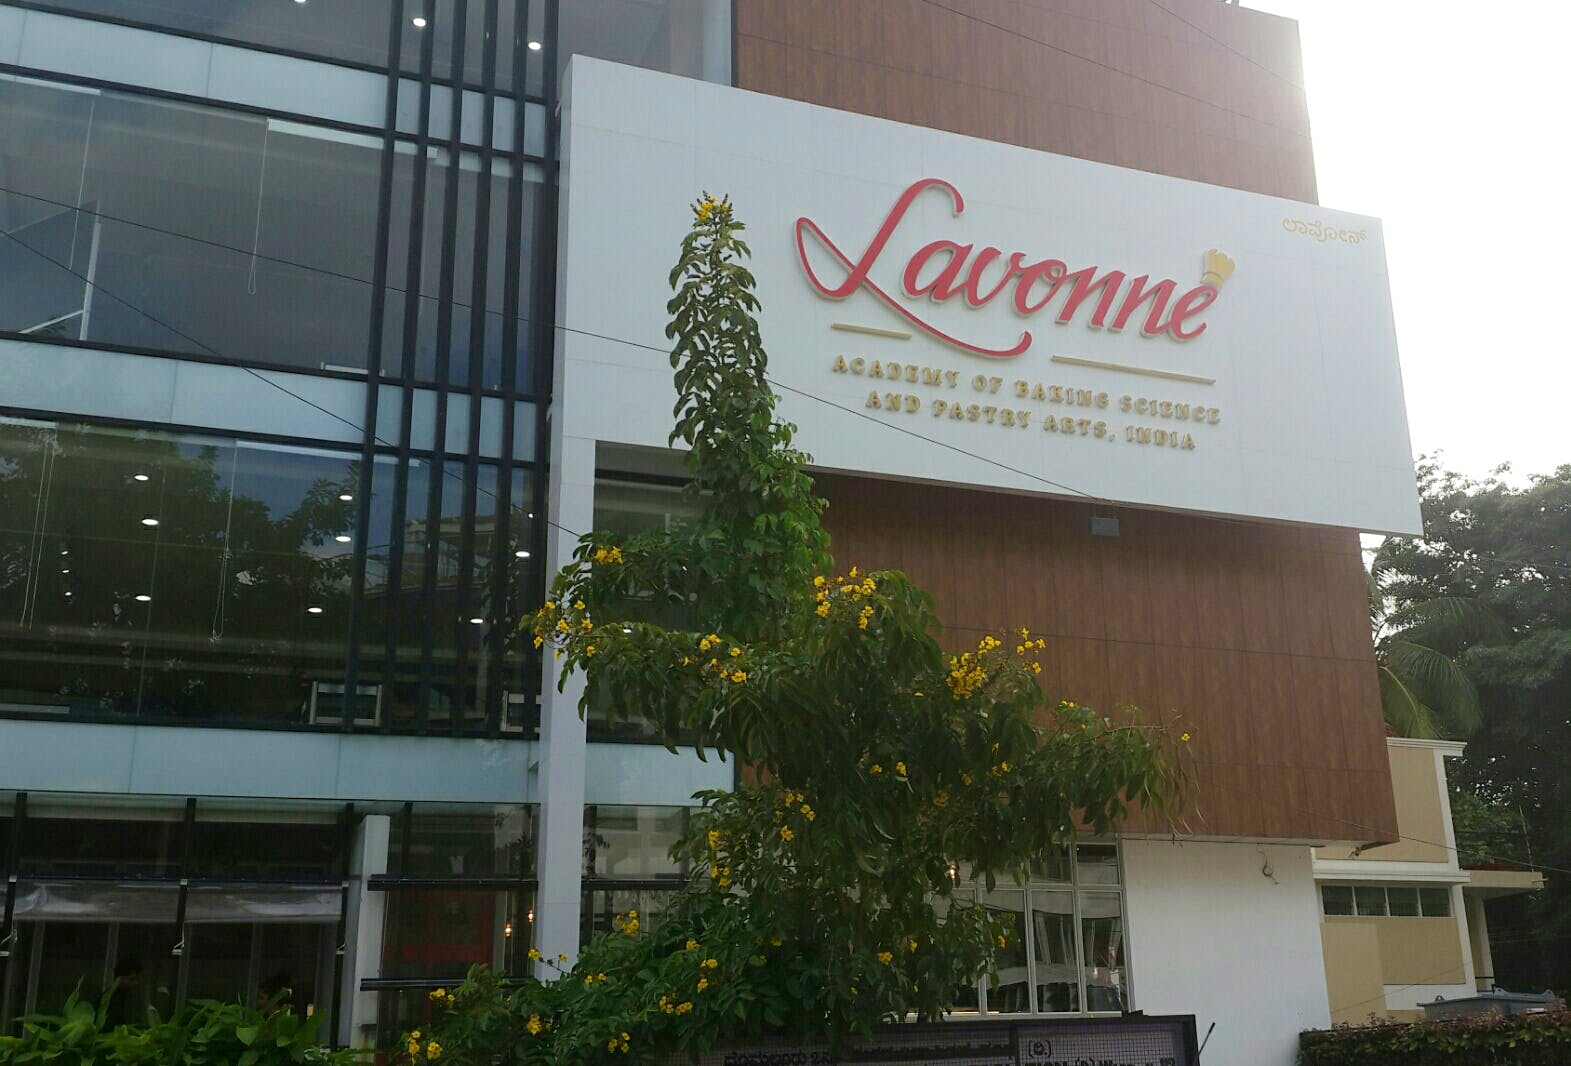 Lavonne - The ultimate cake shop